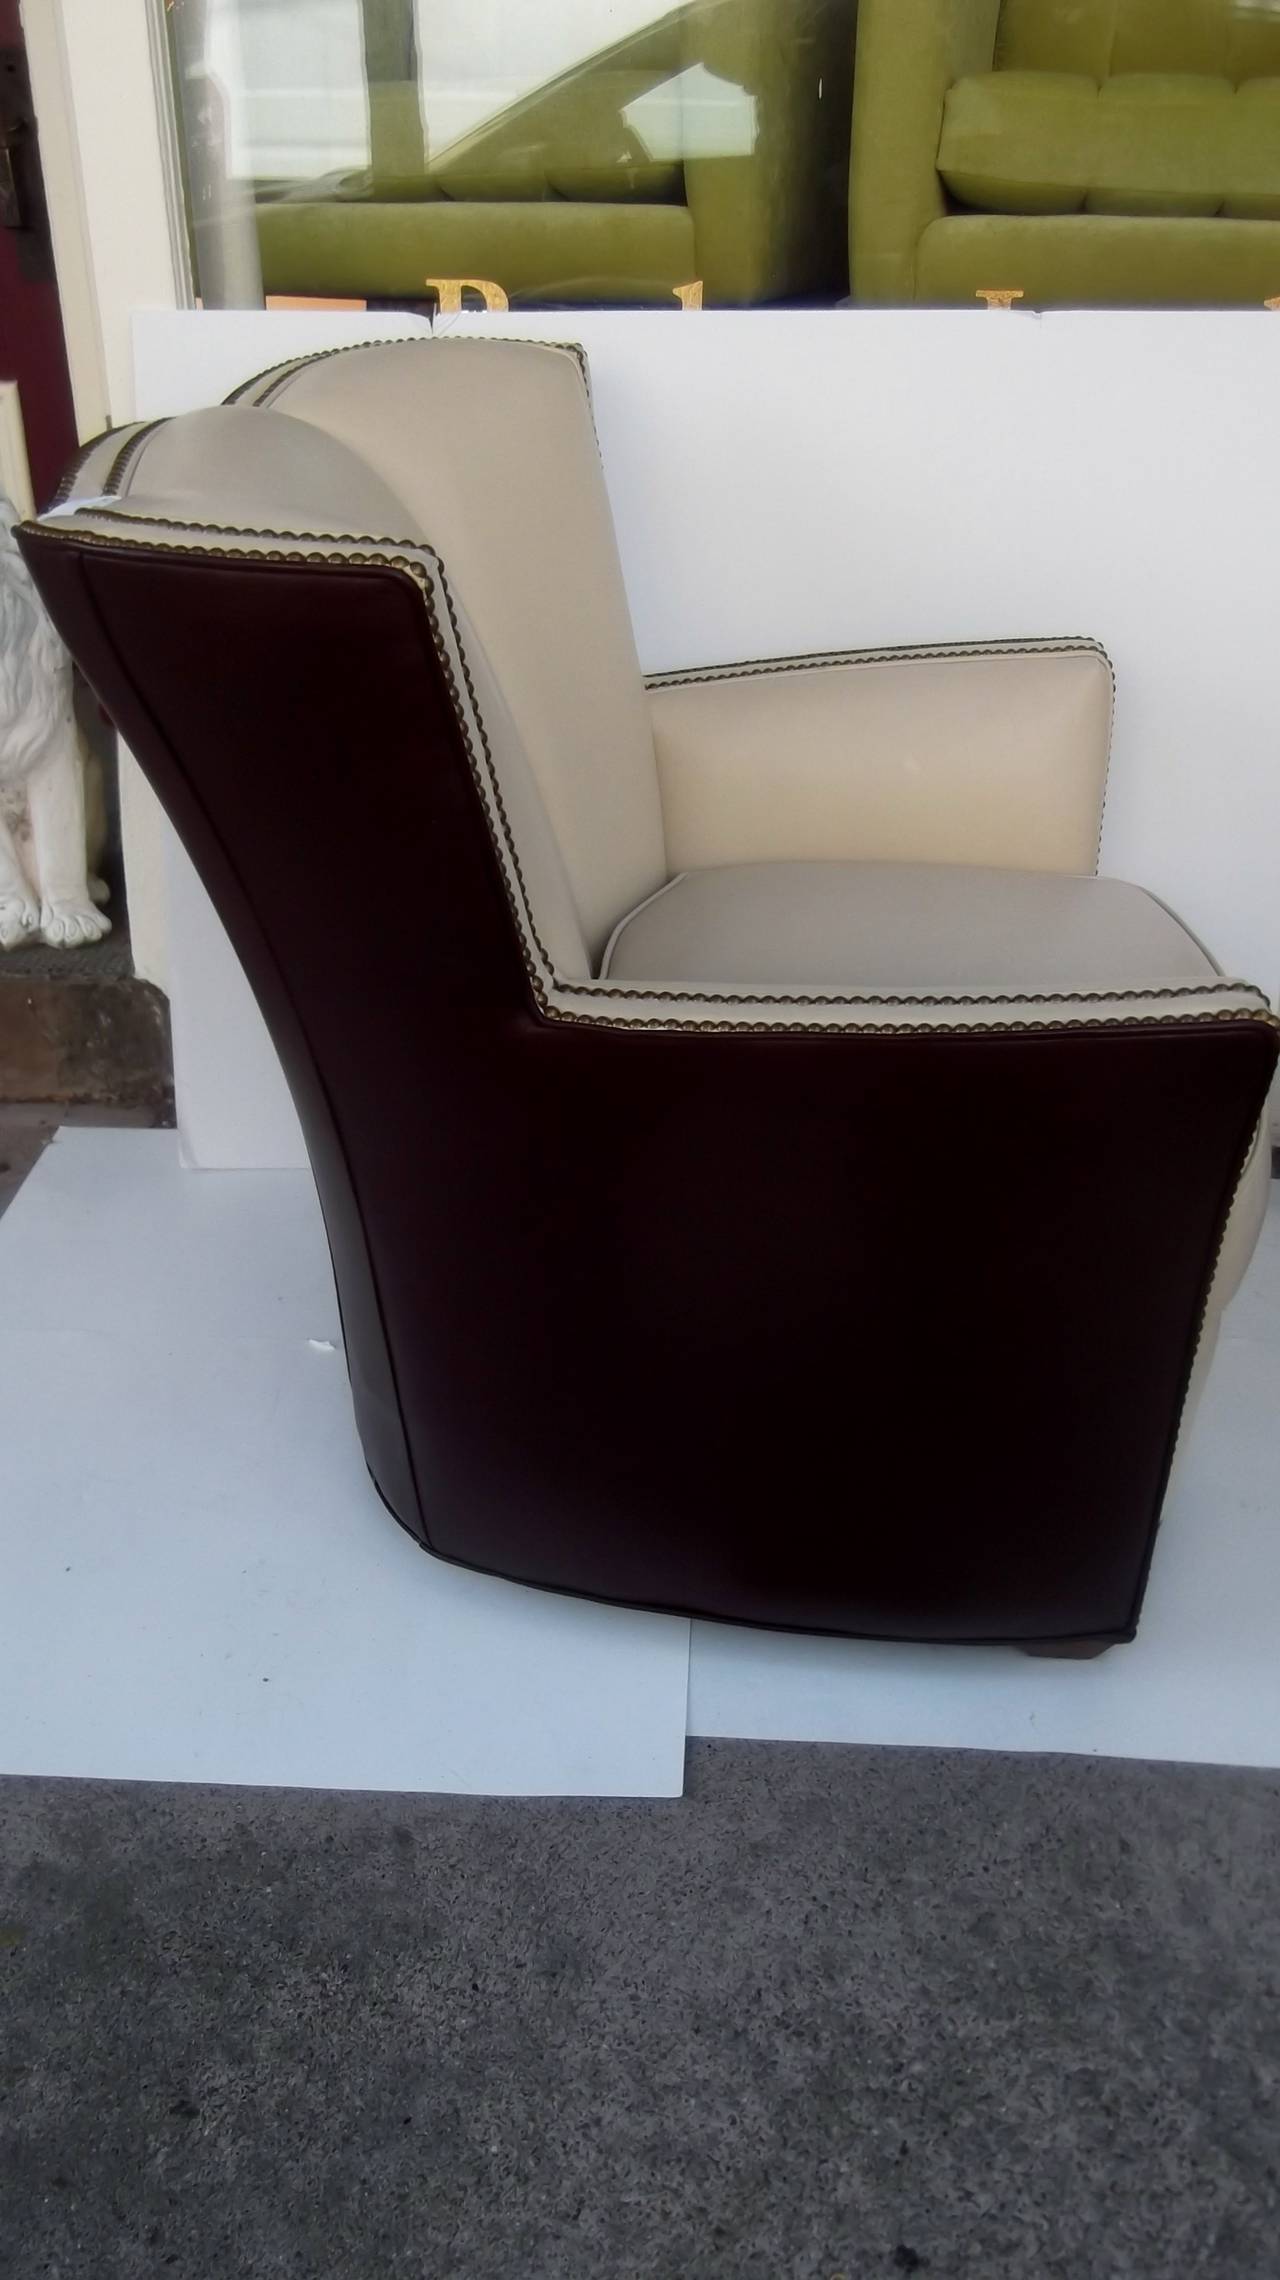 100% high quality leather chairs made by Hancock and Moore, this frame is now retired.  The vanilla lather interior is offset with a double row of aged brass nail head trim with faired back and arms.  The outside is covered in luscious deep eggplant